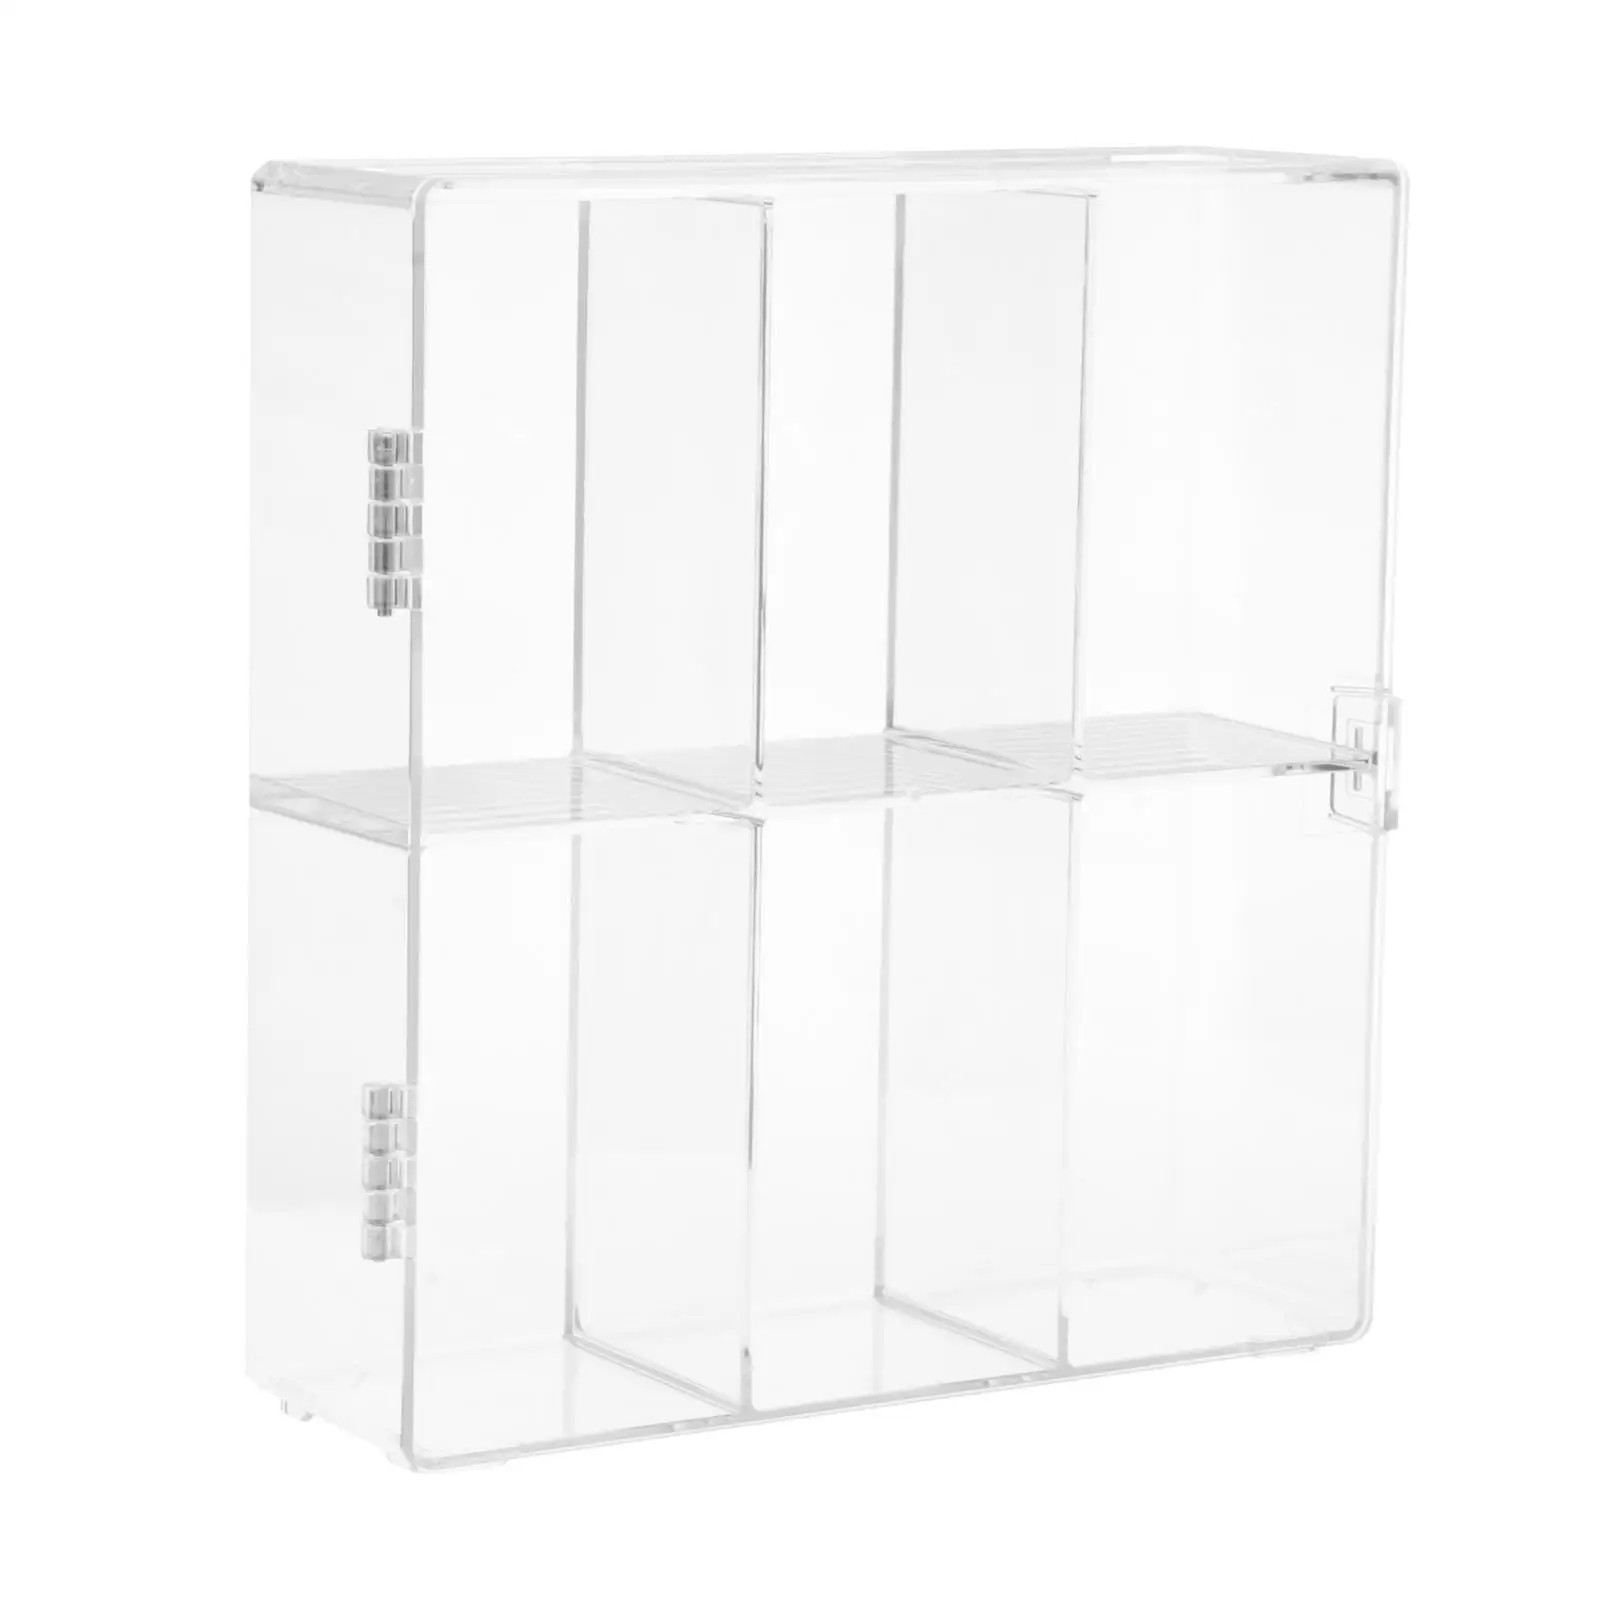 Acrylic Display Rack Multi-Layer Dustproof 6 Shelves Vertical Protector for Home Bedroom Blind Box Doll Model Miniatures